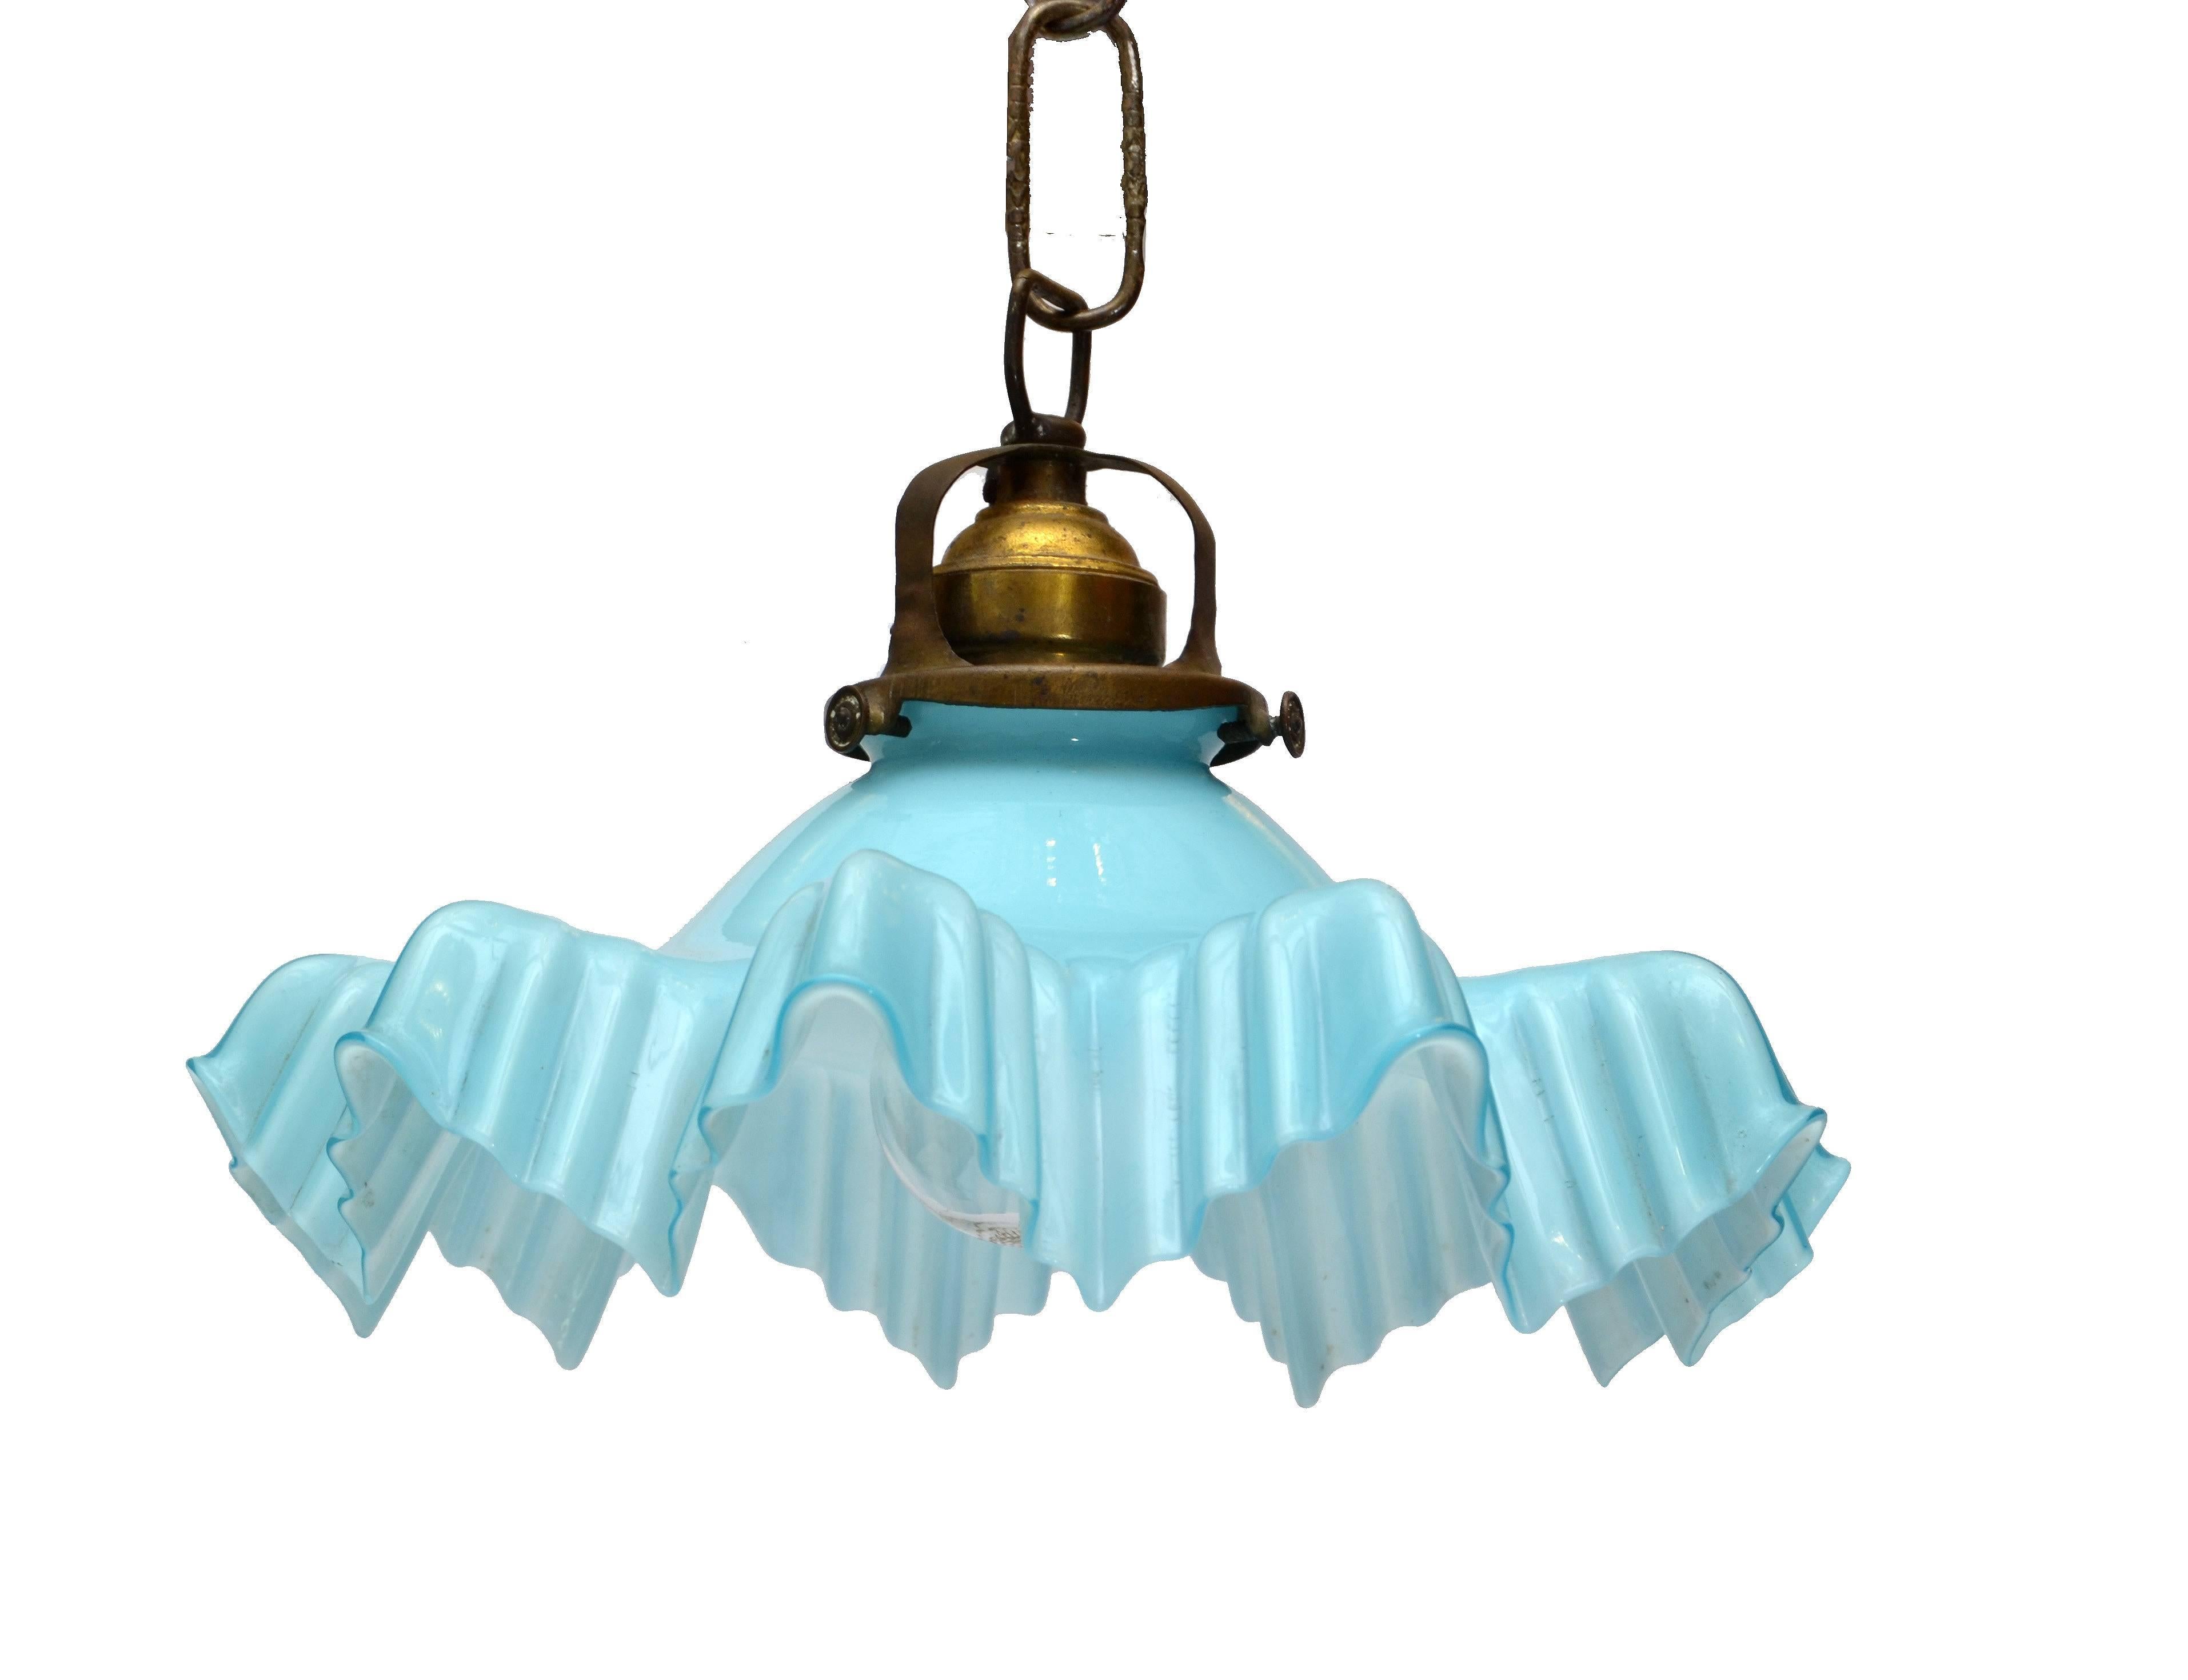 20th Century French Blue Opaline Glass Ruffled Ceiling Light with Bronze Fitting